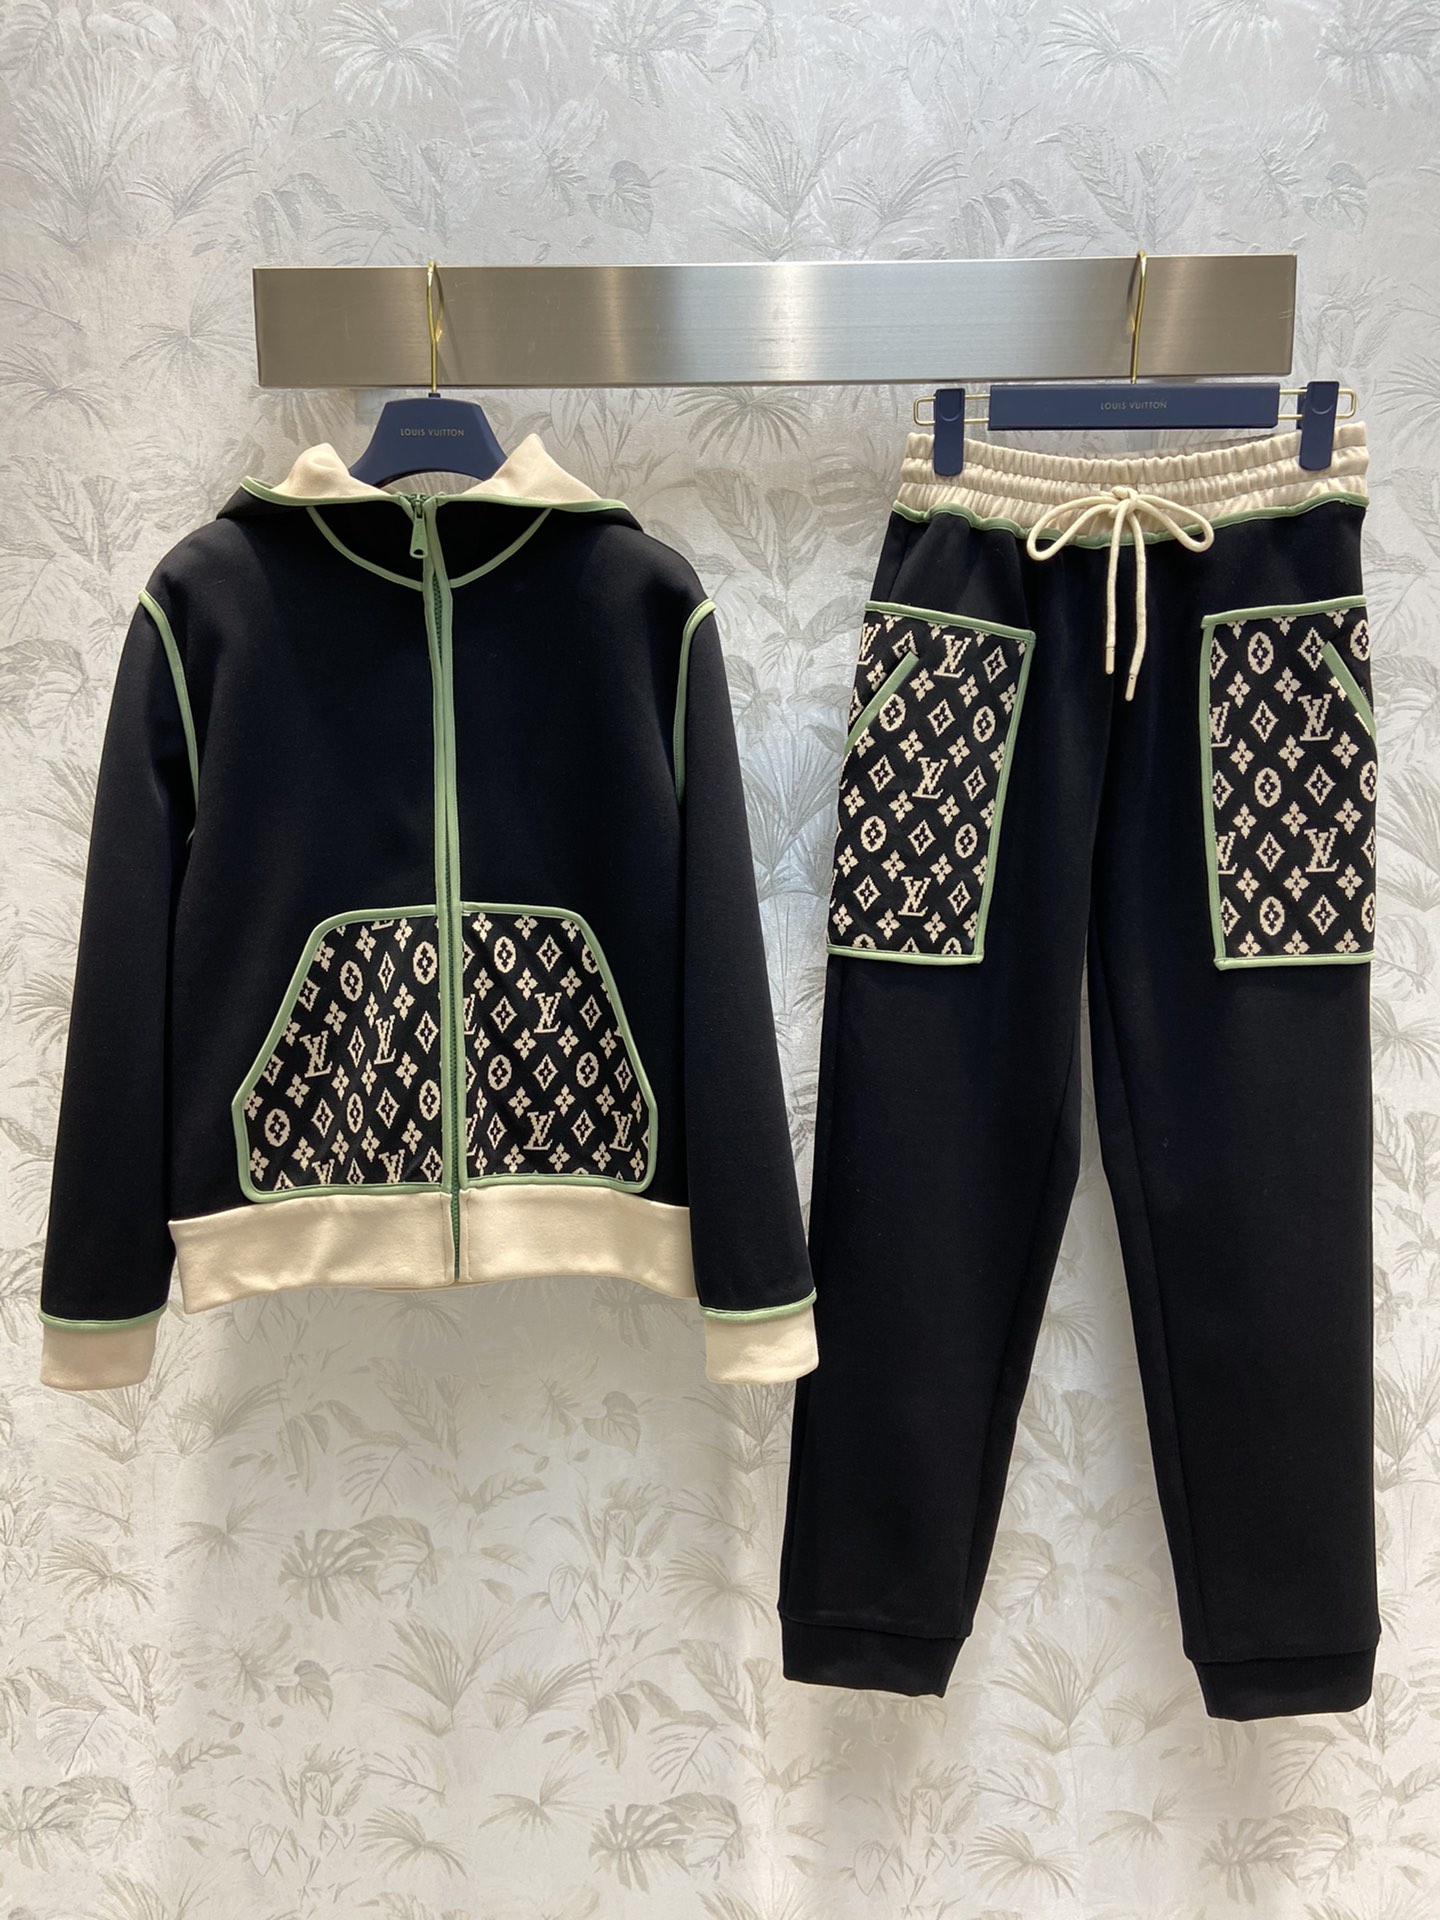 Louis Vuitton Clothing Two Piece Outfits & Matching Sets Cotton Knitting Fall/Winter Collection Hooded Top